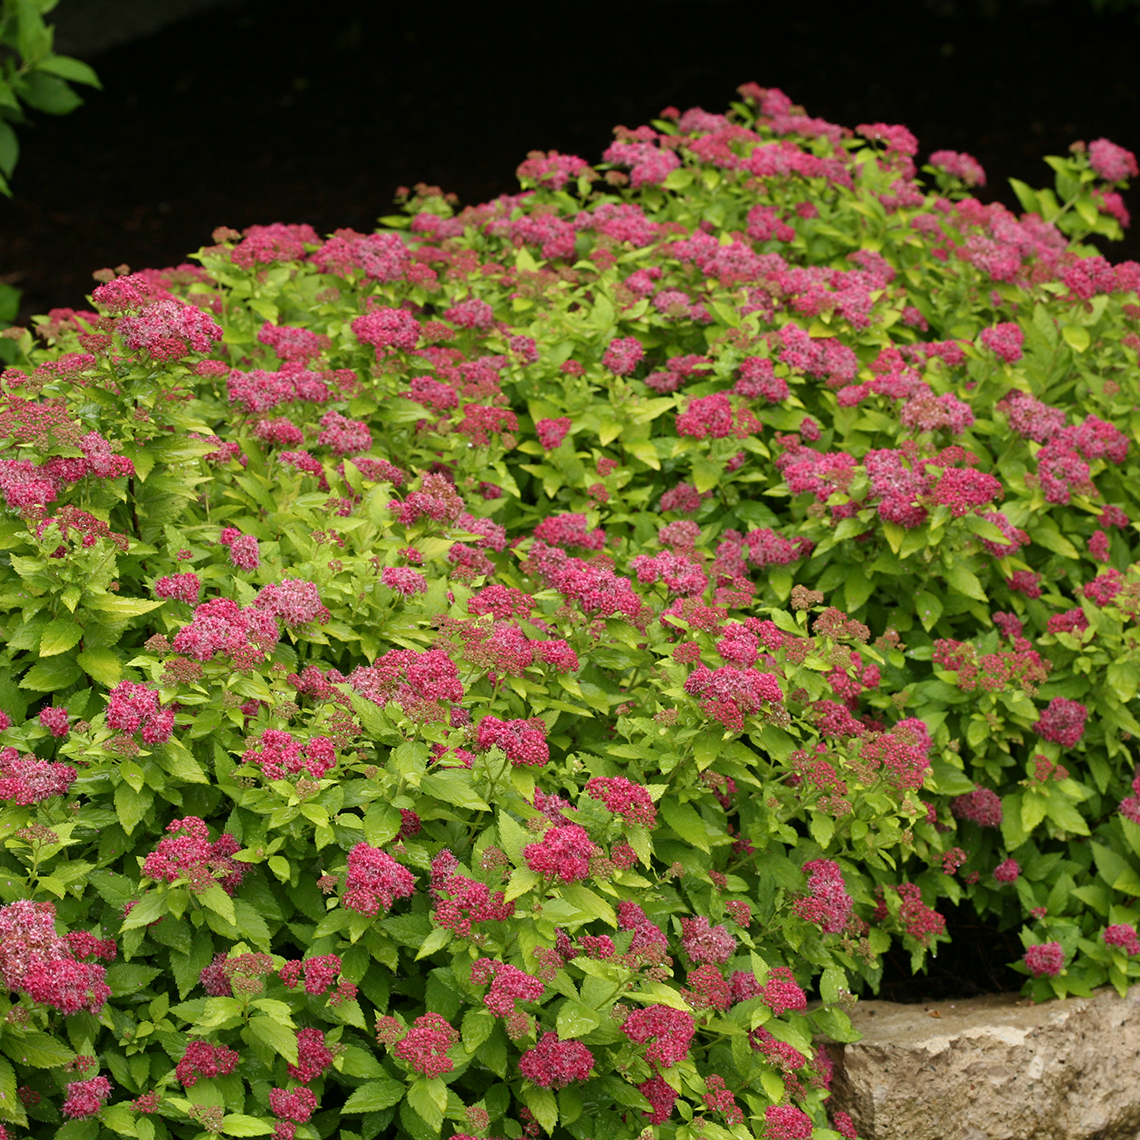 Pure pink flowers on a compact gold leafed Double Play Gold Spiraea